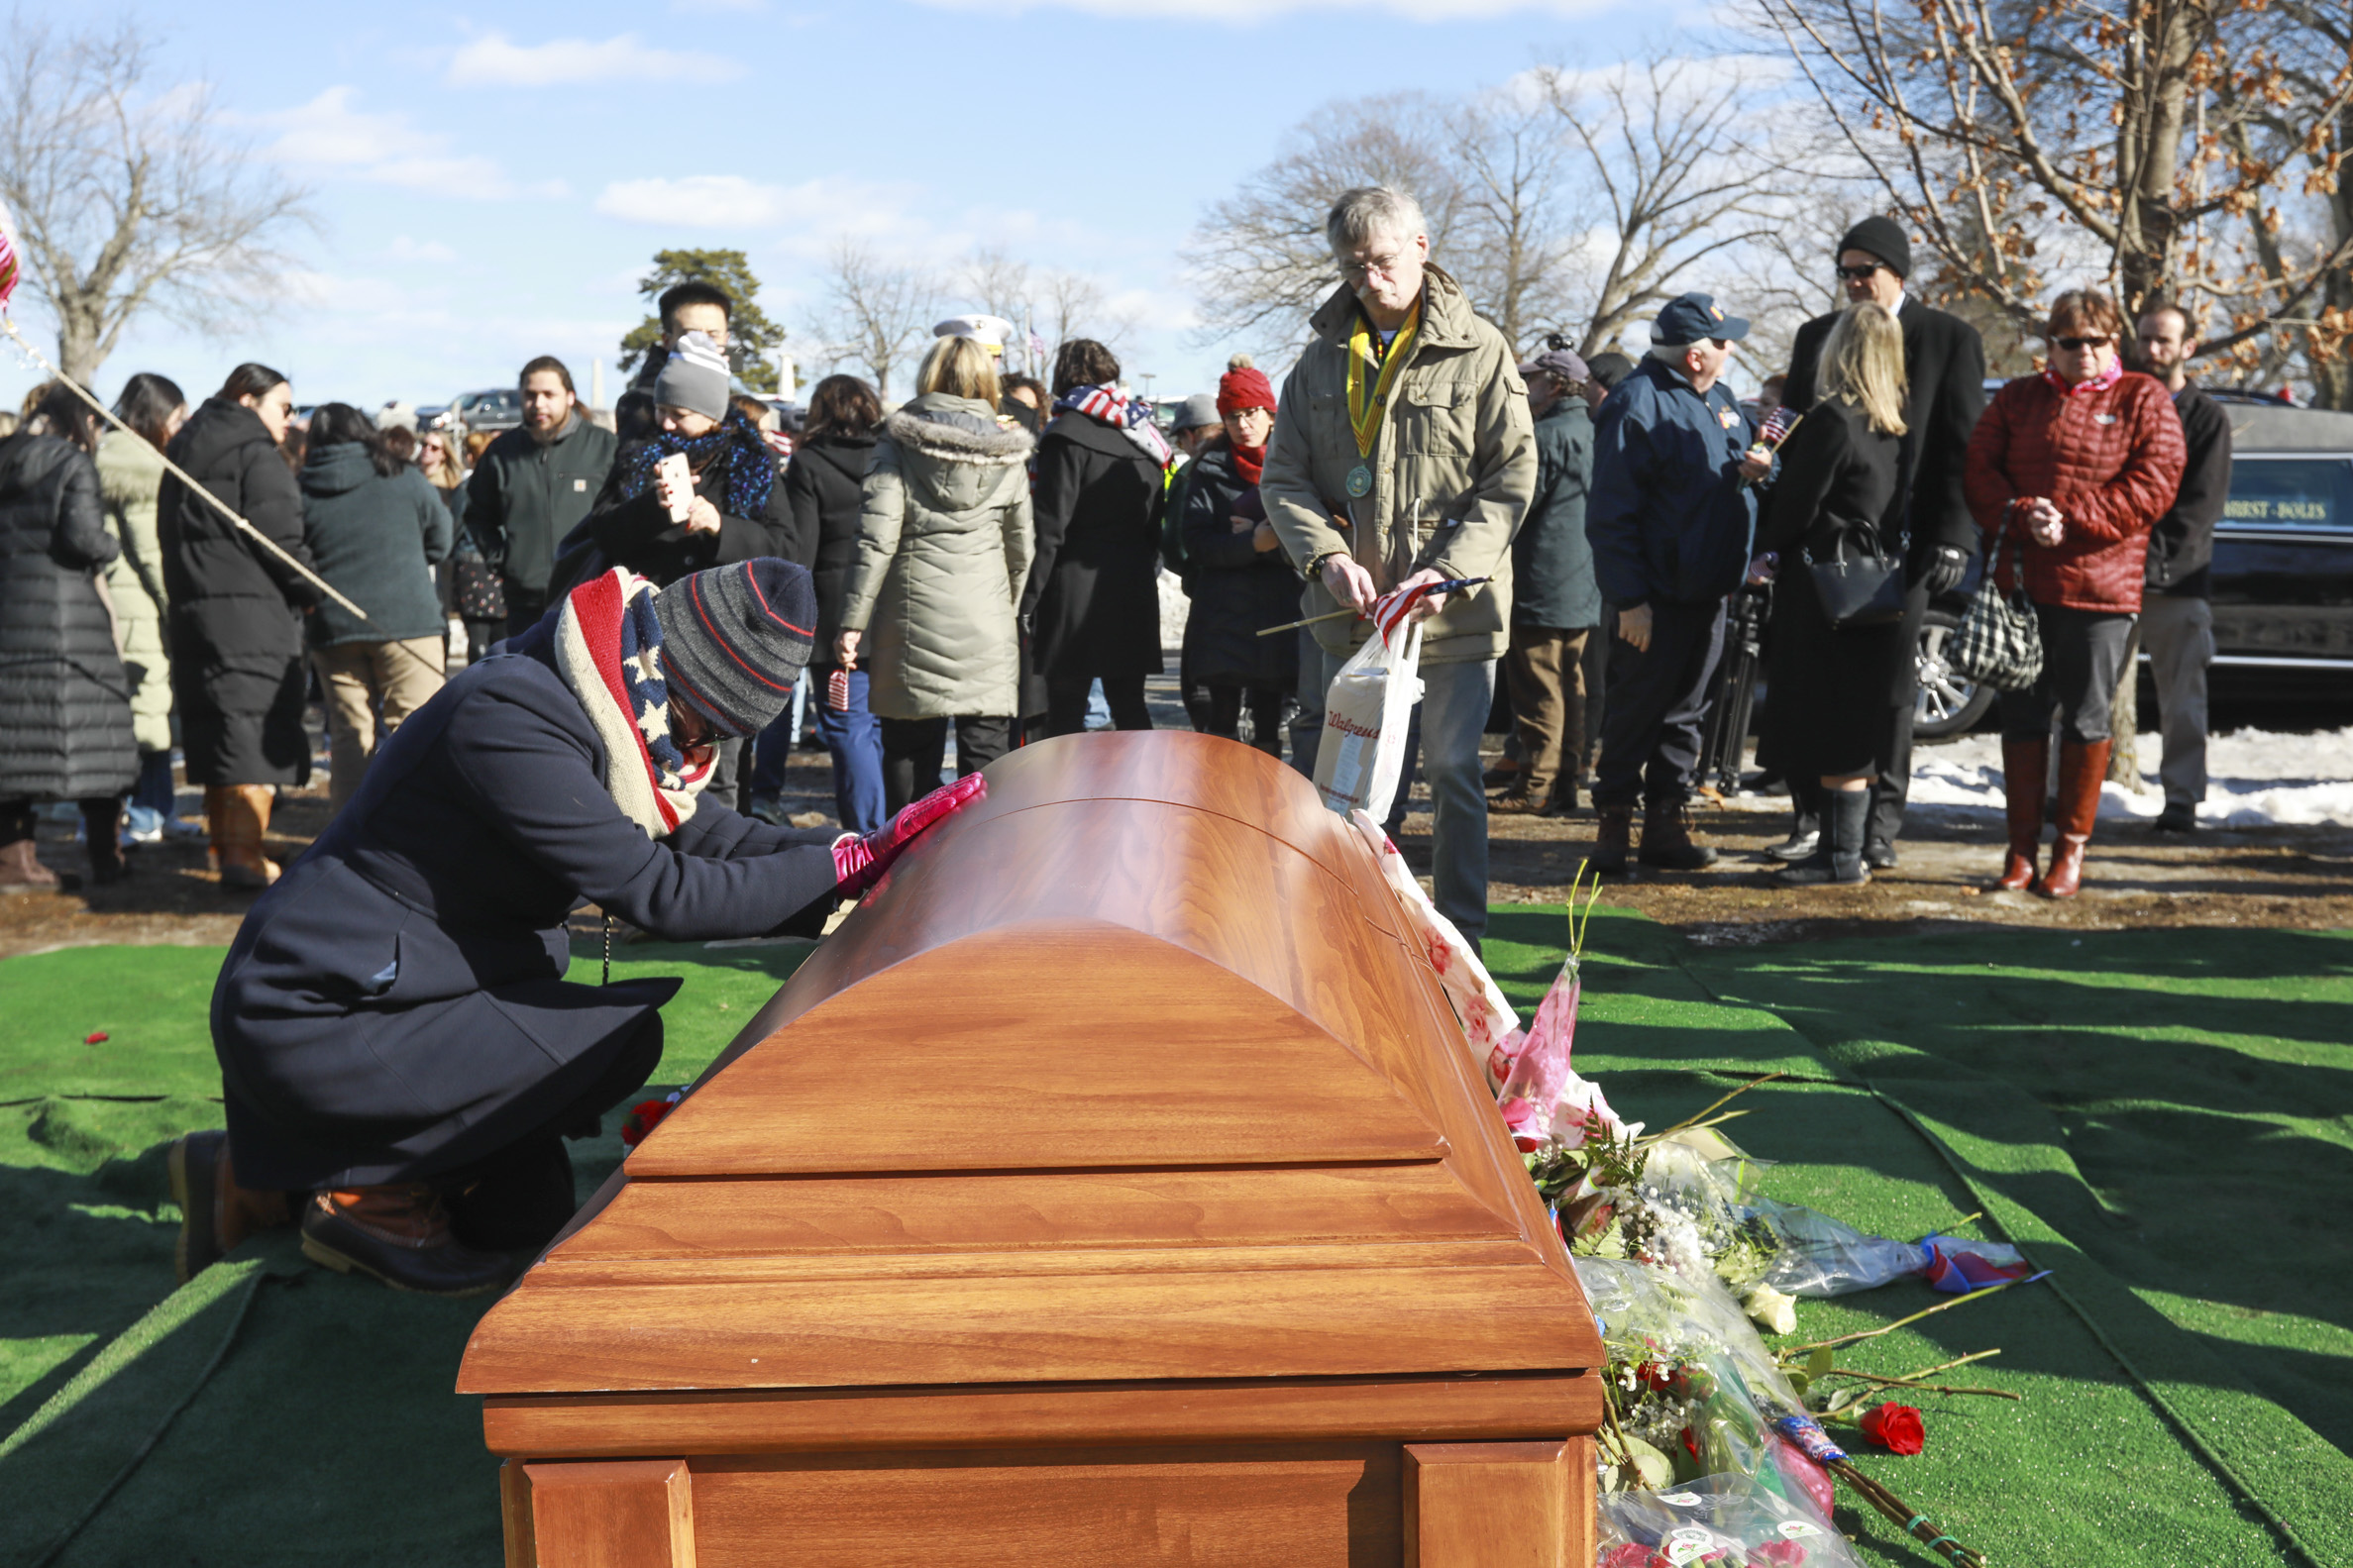 Hundreds attend the funeral for Army Veteran James McCue to pay their respects at the Bellevue Cemetery on Thursday, February 14, 2019 in Lawrence, Massachusetts. (MediaNews Group/Boston Herald vi—MediaNews Group via Getty Images)